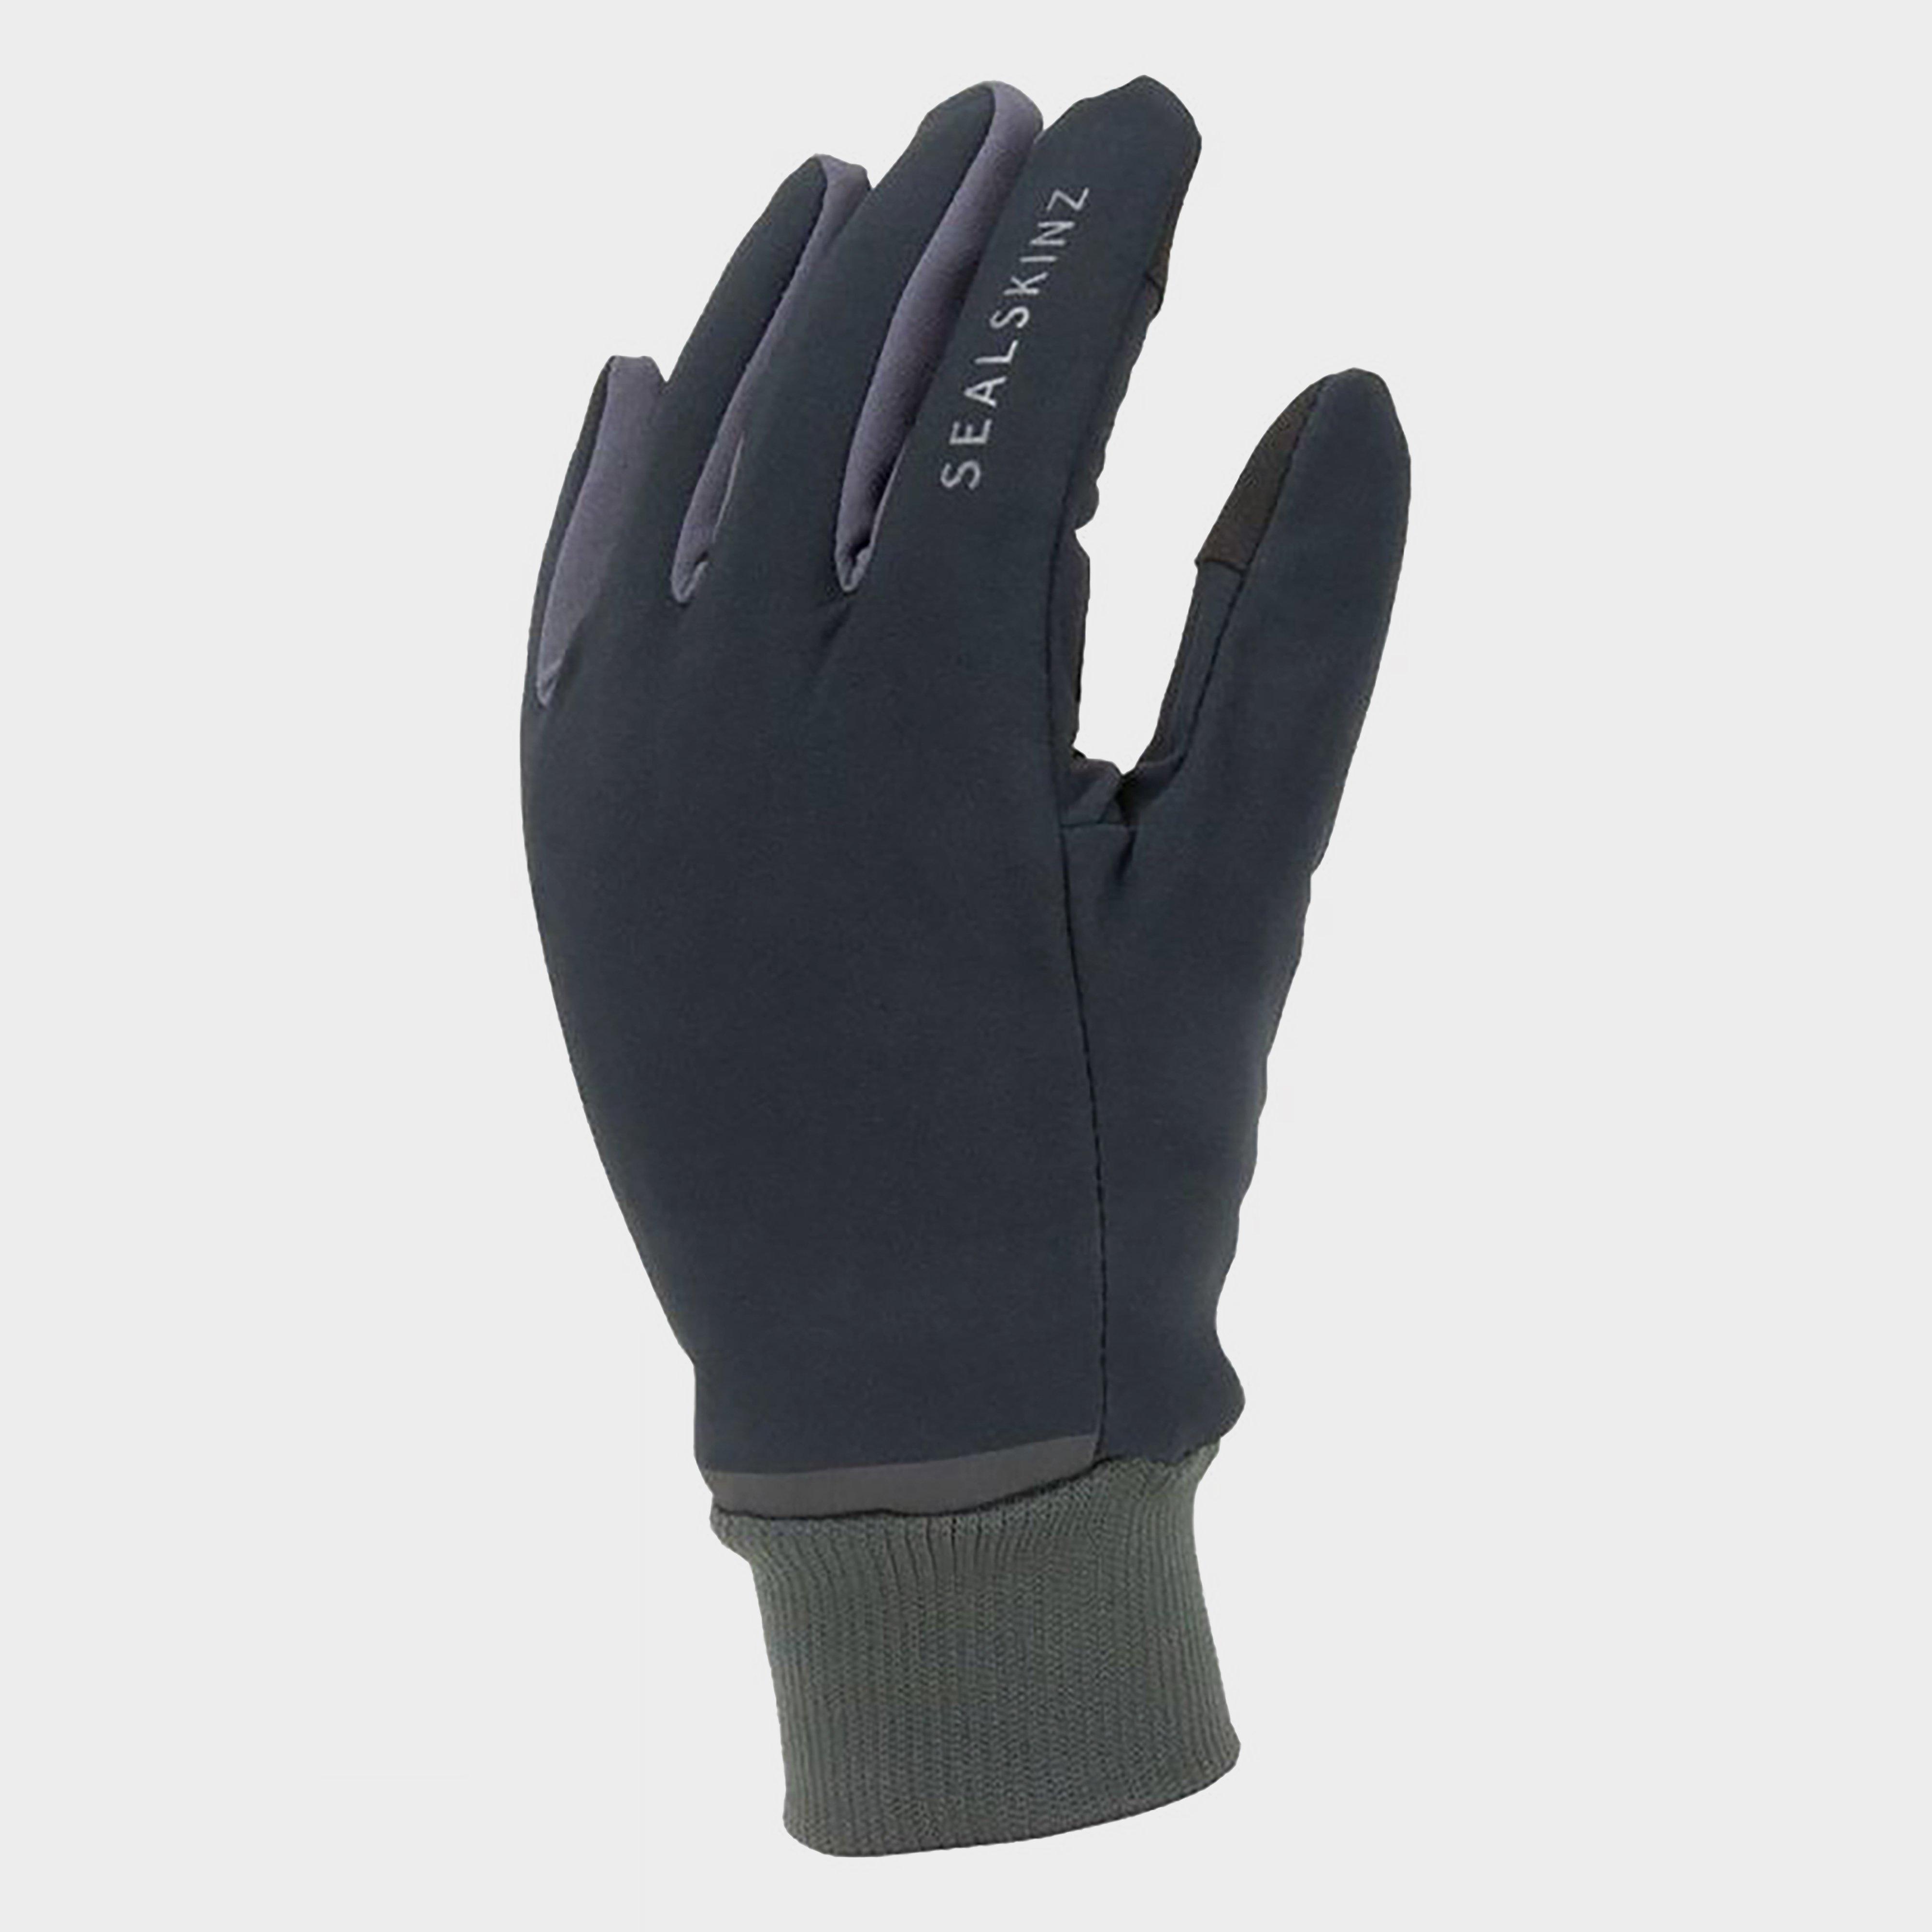 Image of Sealskinz Waterproof All Weather Lightweight Glove With Fusion Control? - Black, Black